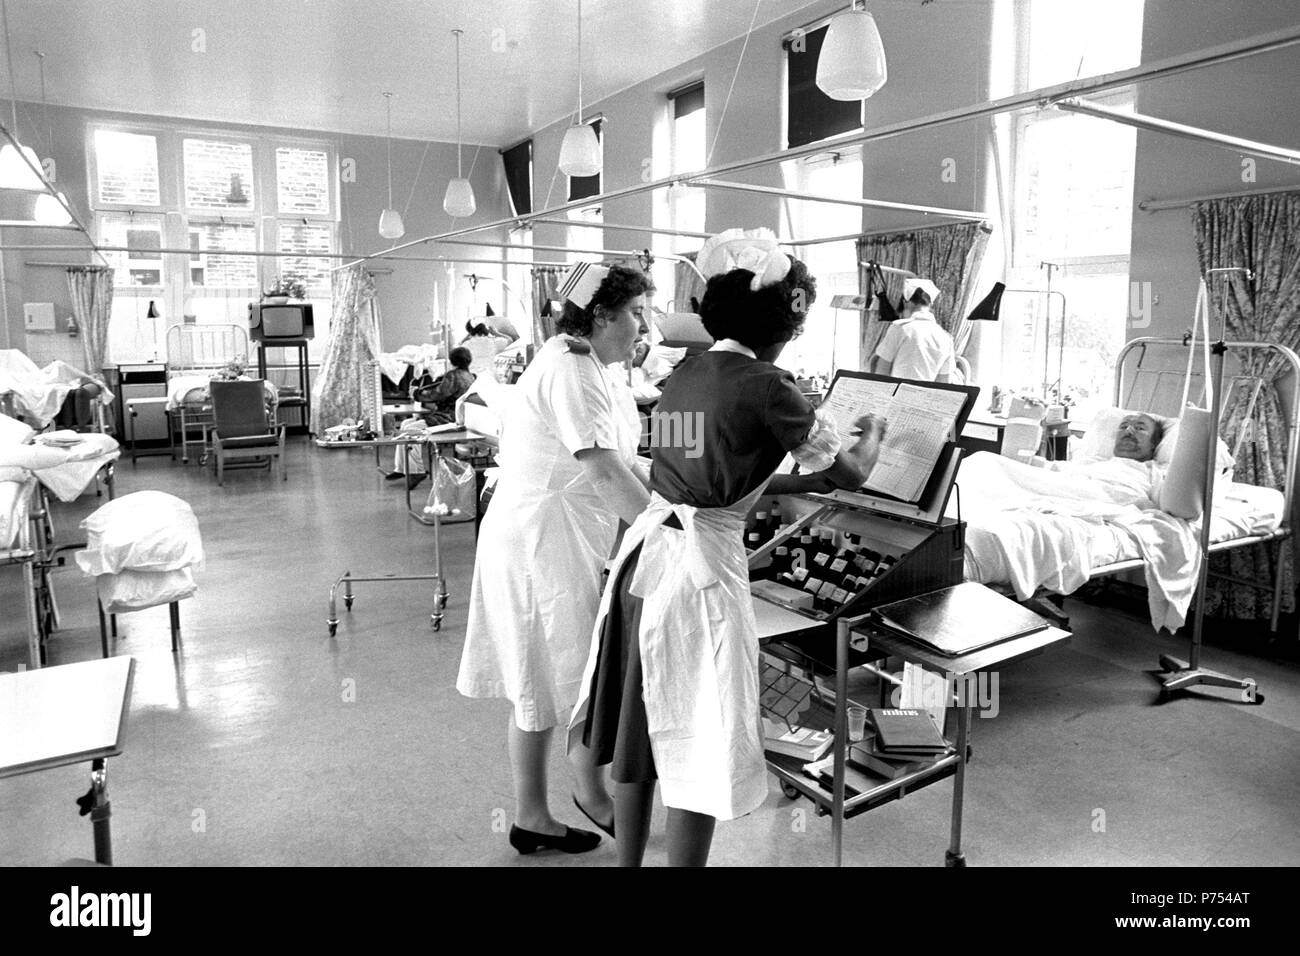 File photo dated 13/05/85 of a ward at Bradford Royal Infirmary, where casualties of the Bradford City stadium fire disaster were being treated. The NHS will celebrate its 70th anniversary on Thursday 5th July 2018. Stock Photo